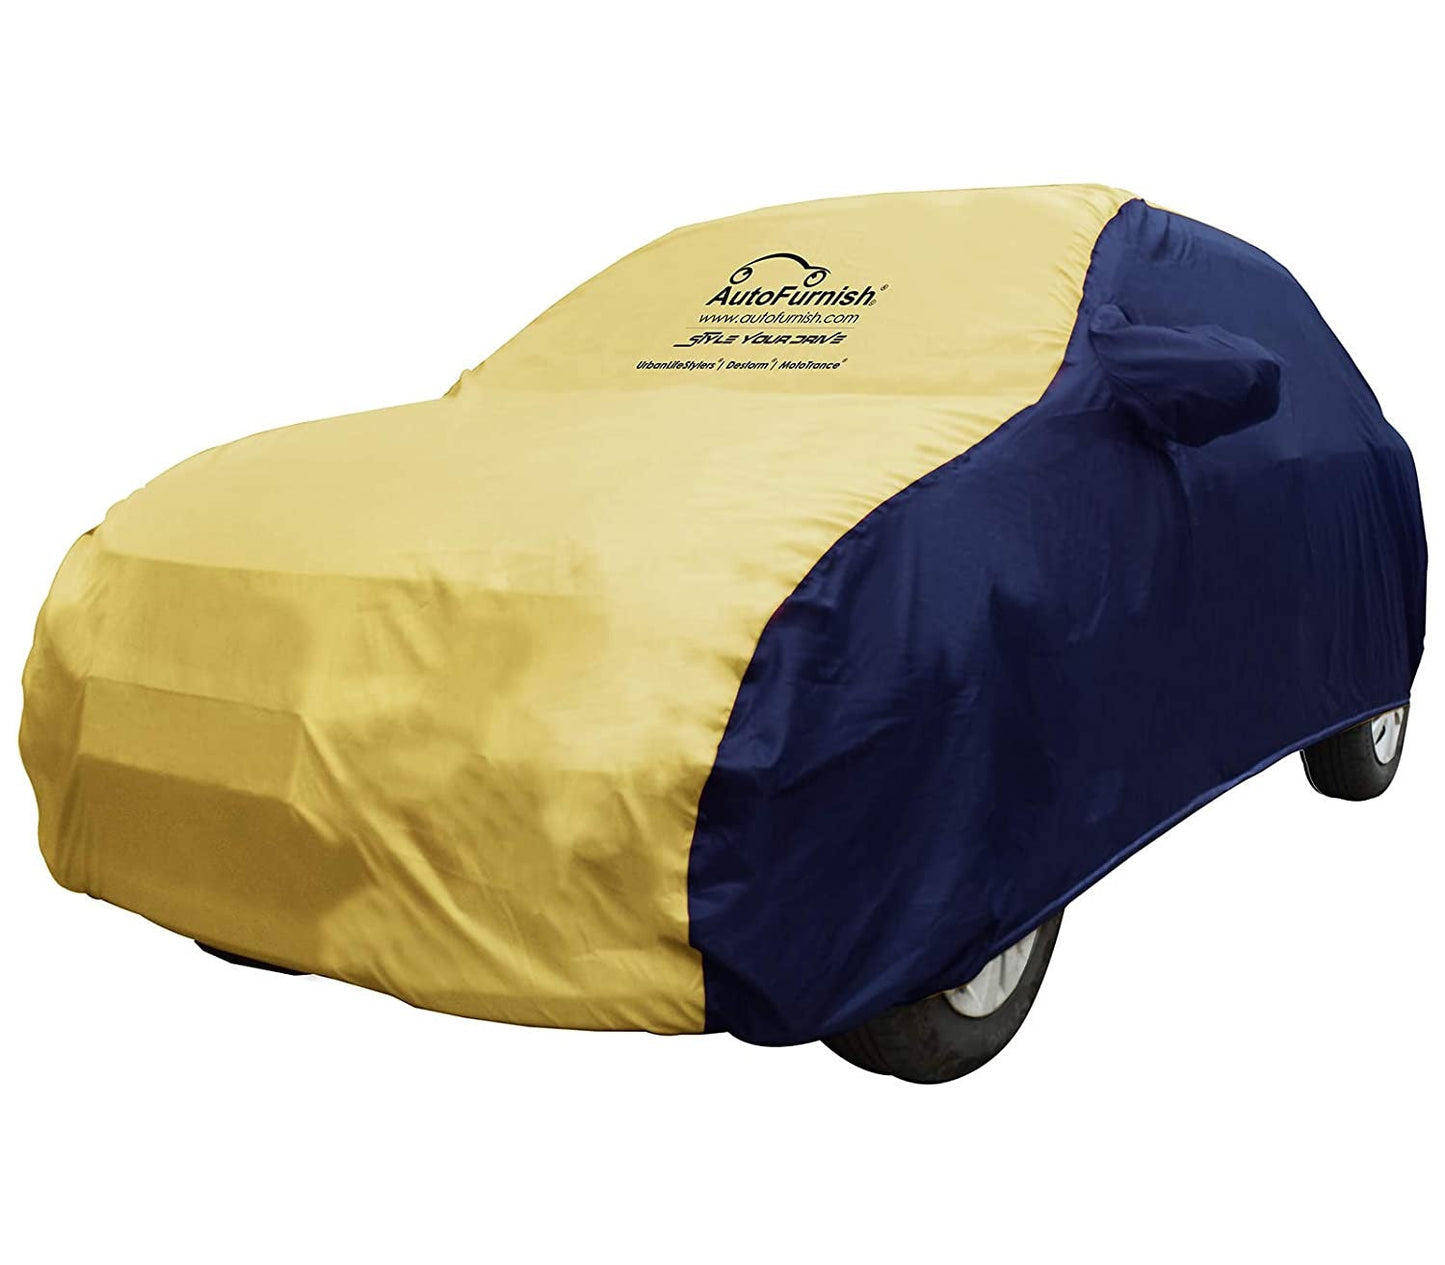 Hyundai Kona (2020) Car Body Cover, Triple Stitched, Heat & Water Resistant with Side Mirror Pockets (SPORTY Series)